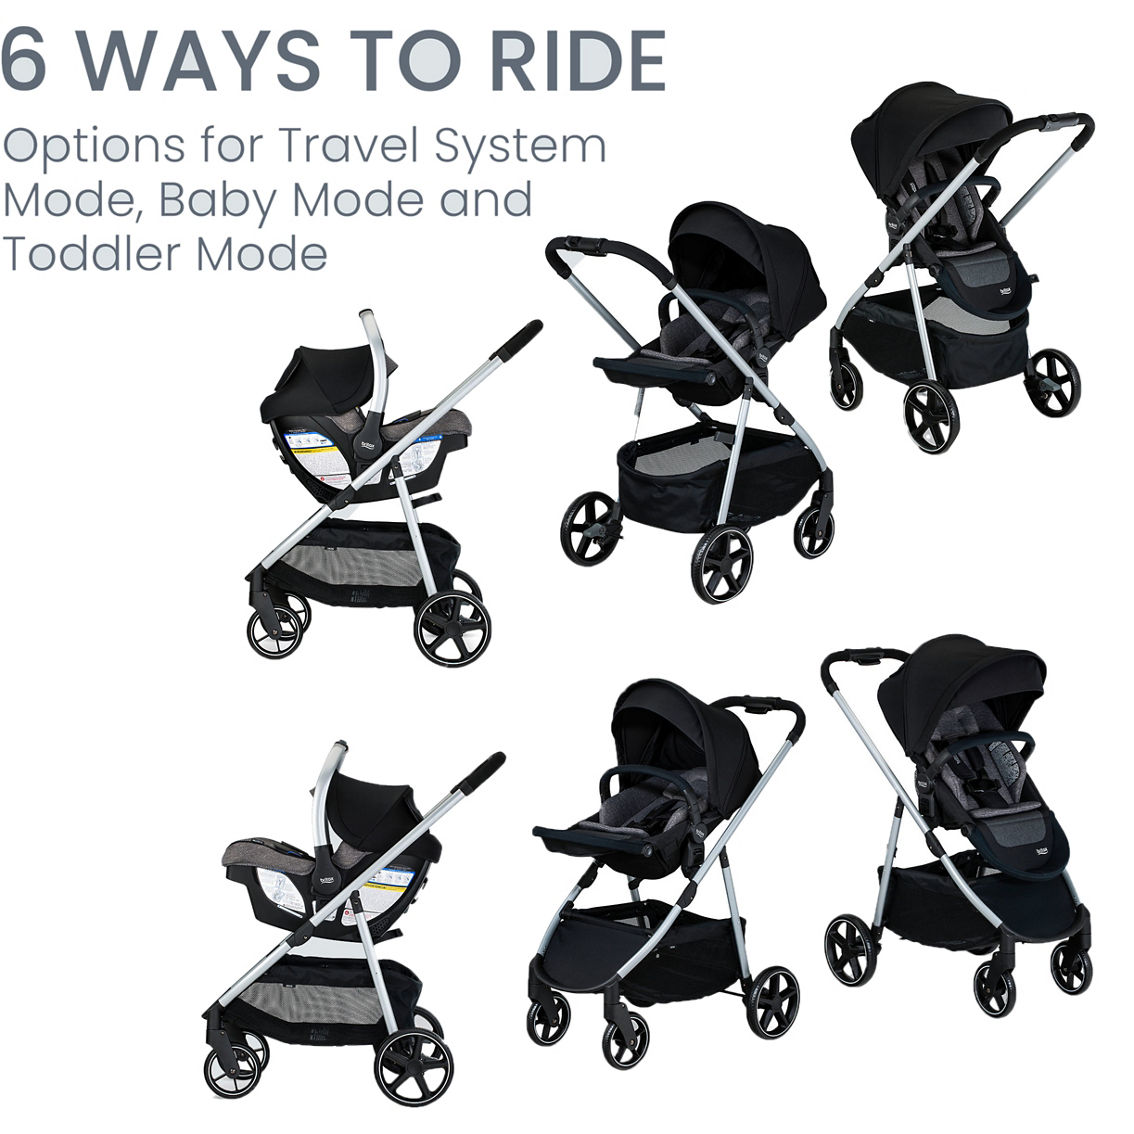 Britax Willow Grove SC Travel System - Image 2 of 2